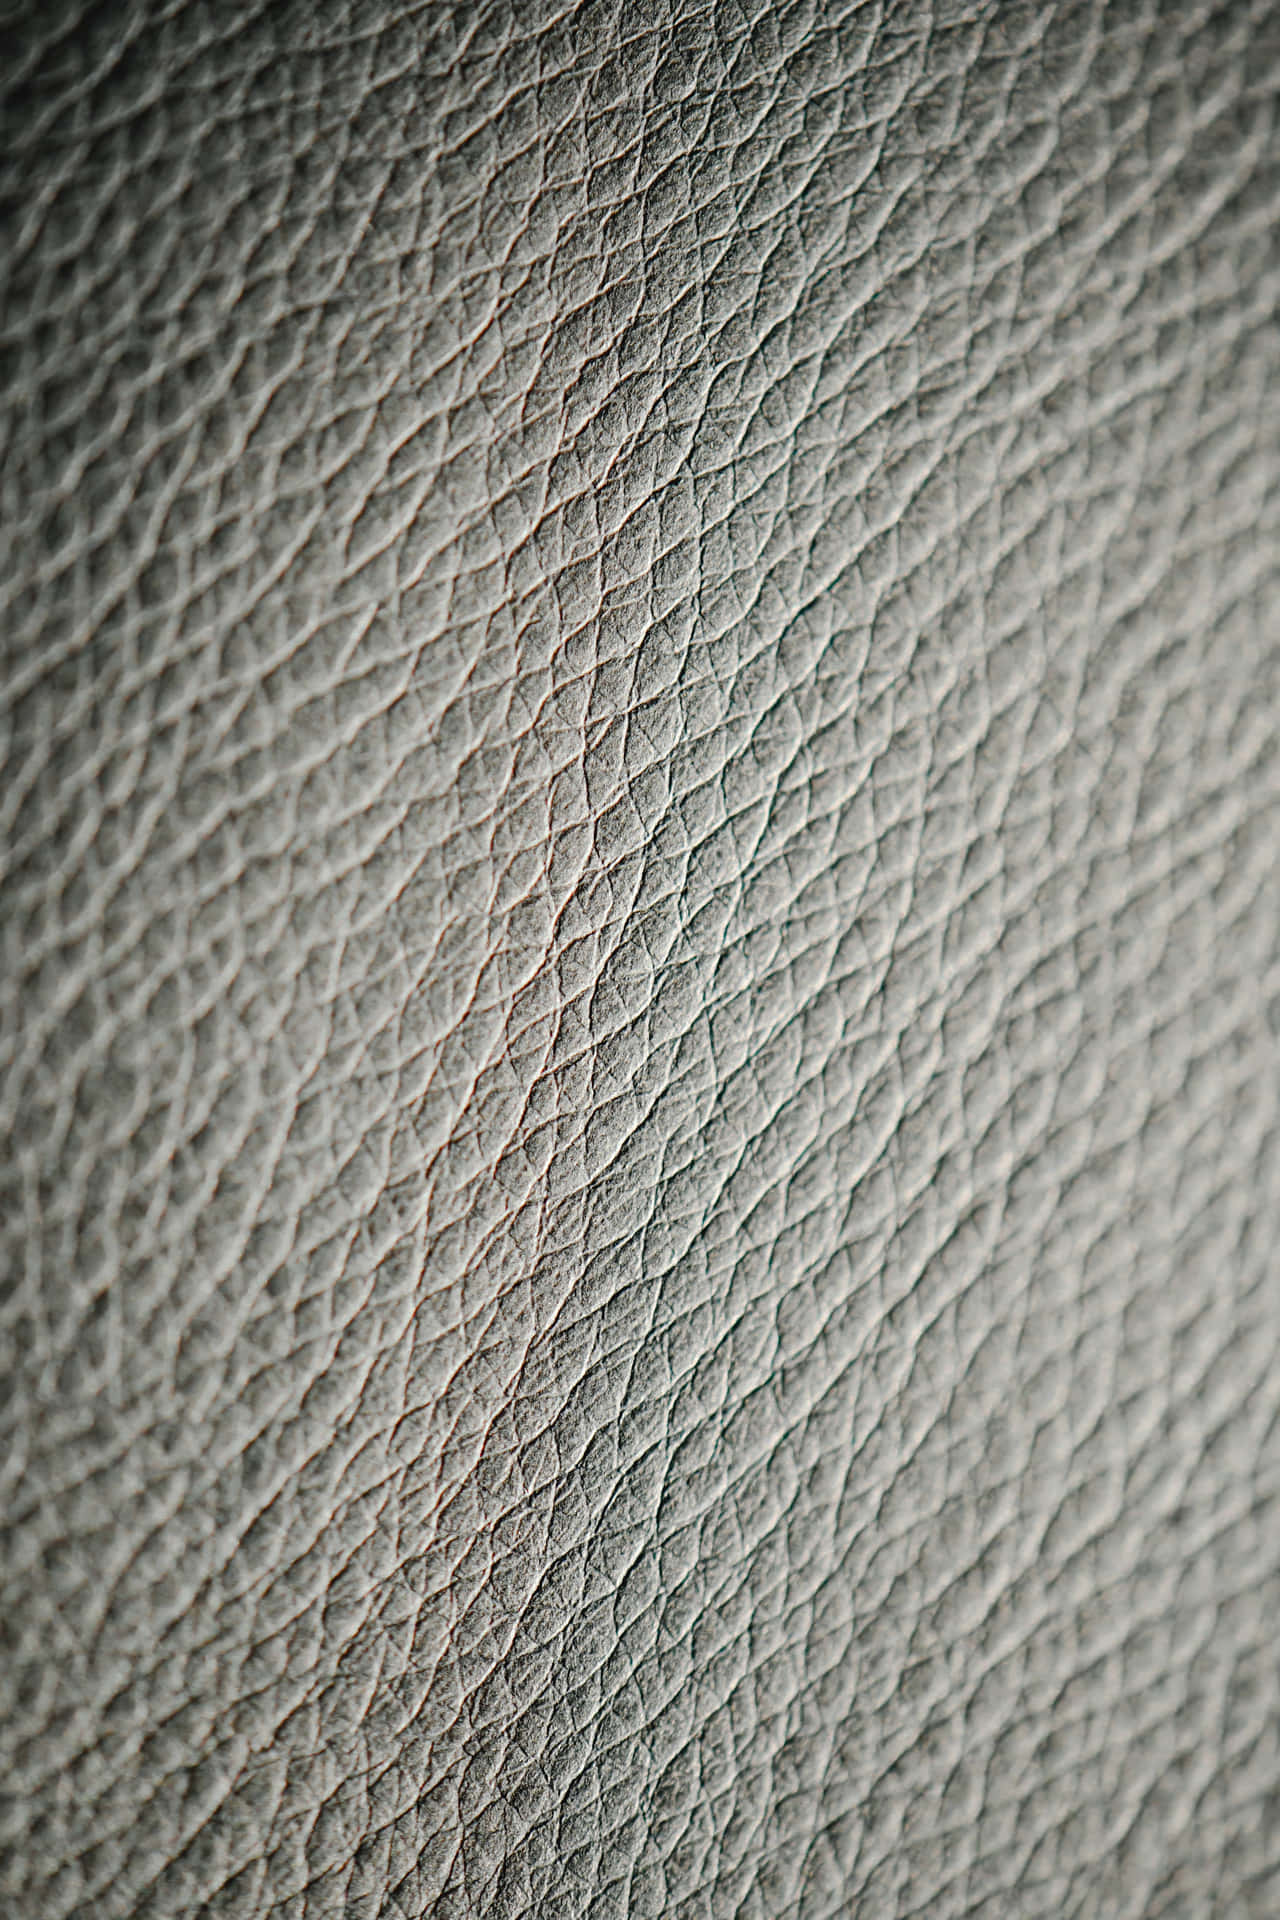 A Close Up Of A White Leather Surface